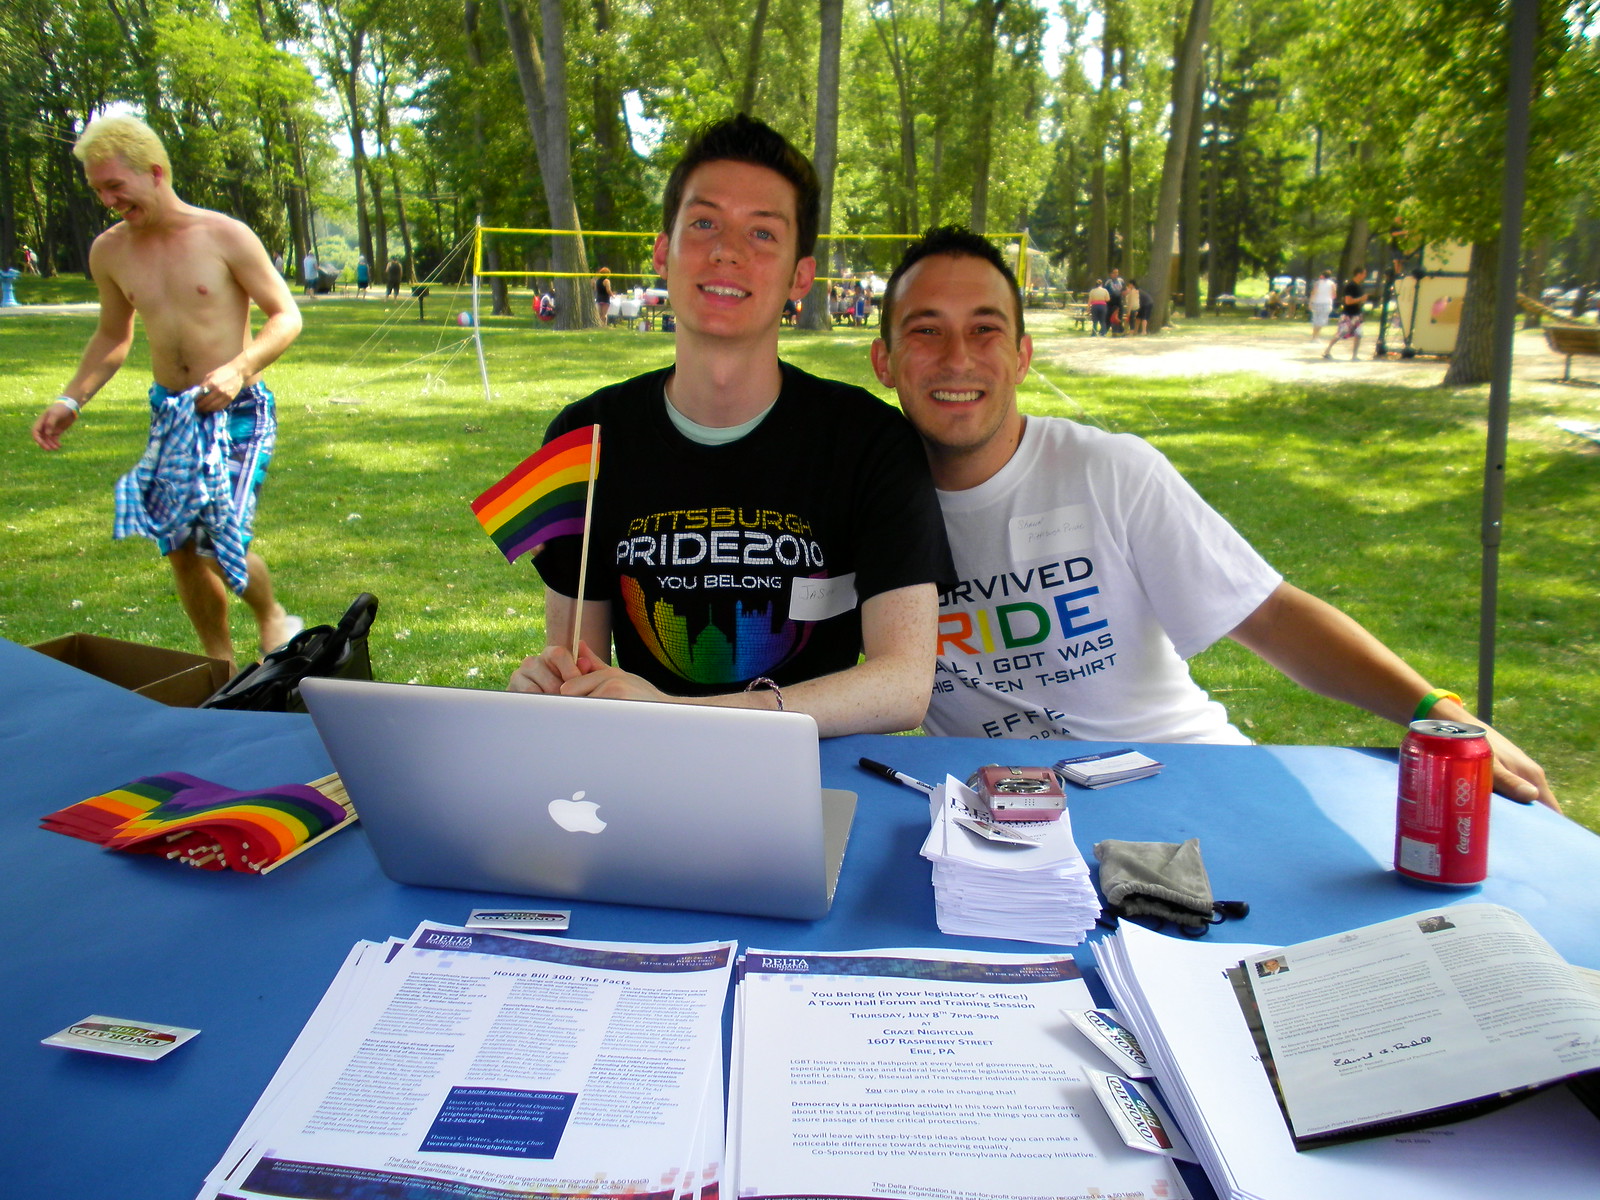 Jason and Shawn from Pittsburgh Pride/Delta Foundation. Photo by Deb Spilko.